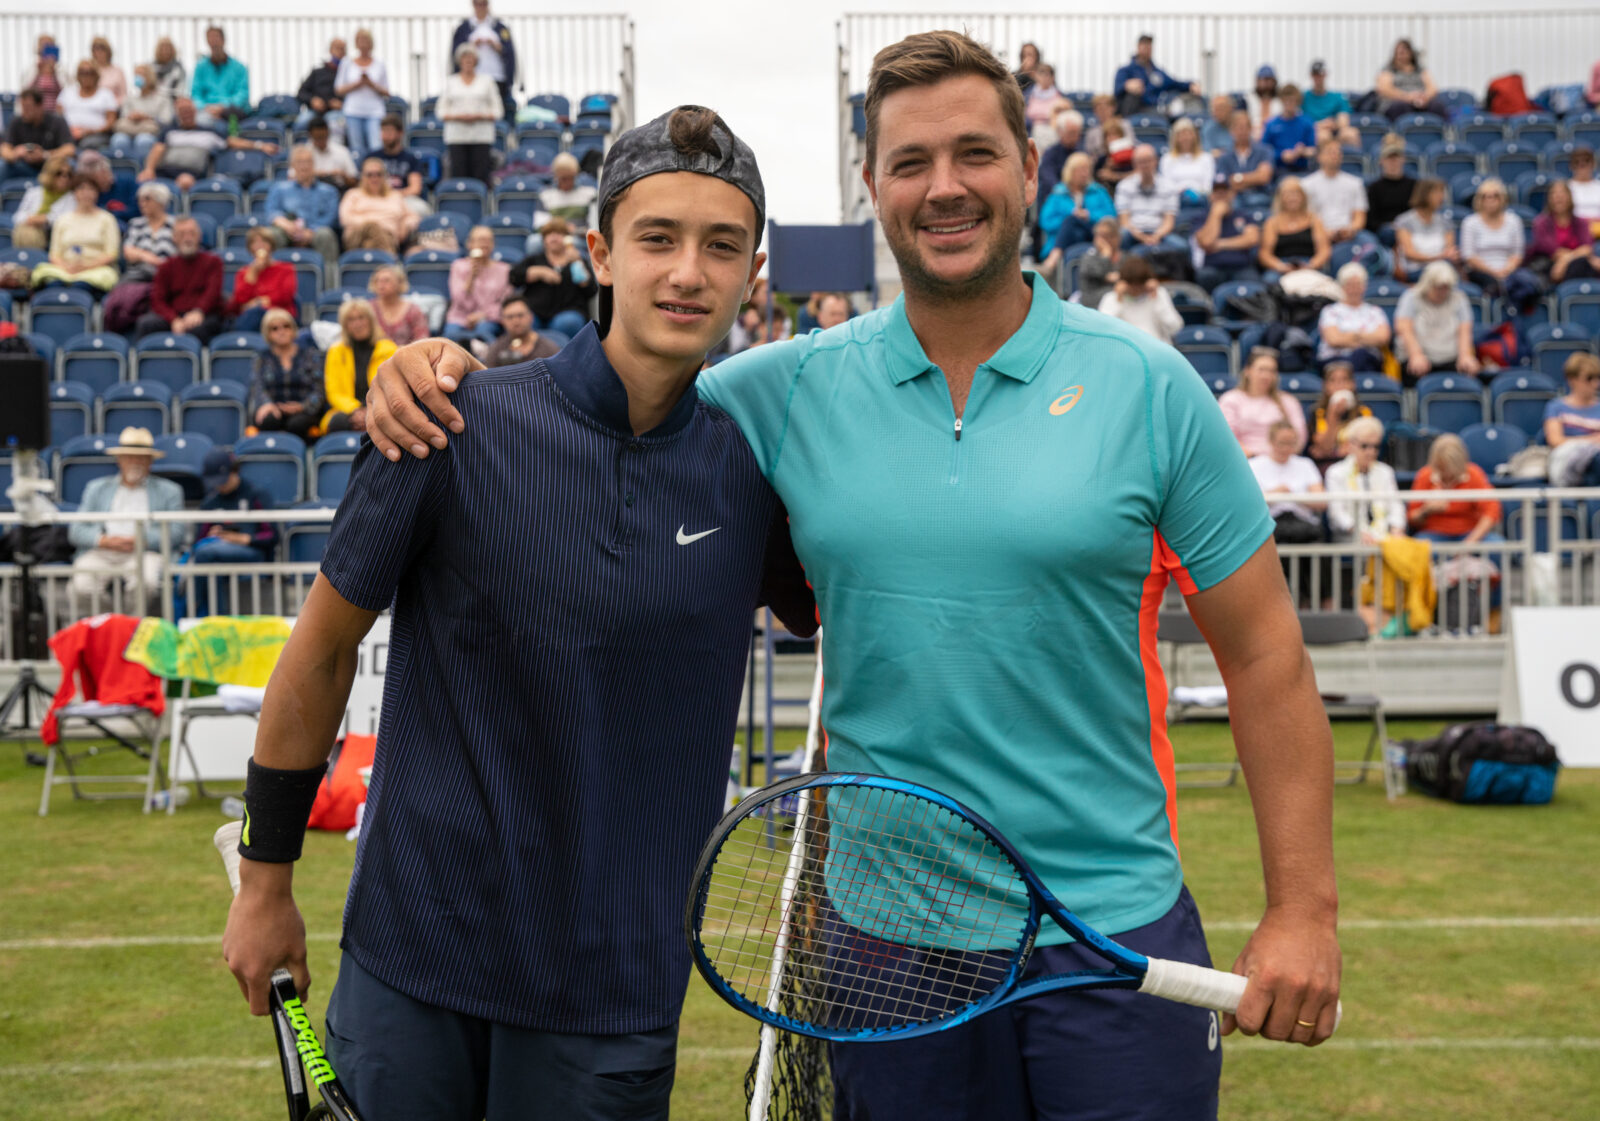 LIVERPOOL, ENGLAND - Thursday, August 19, 2021: Patrick Brady (L) and Marcus Willis (R) before a match during the Liverpool International Tennis Tournament at Liverpool Cricket Club. (Pic by David Rawcliffe/Propaganda)